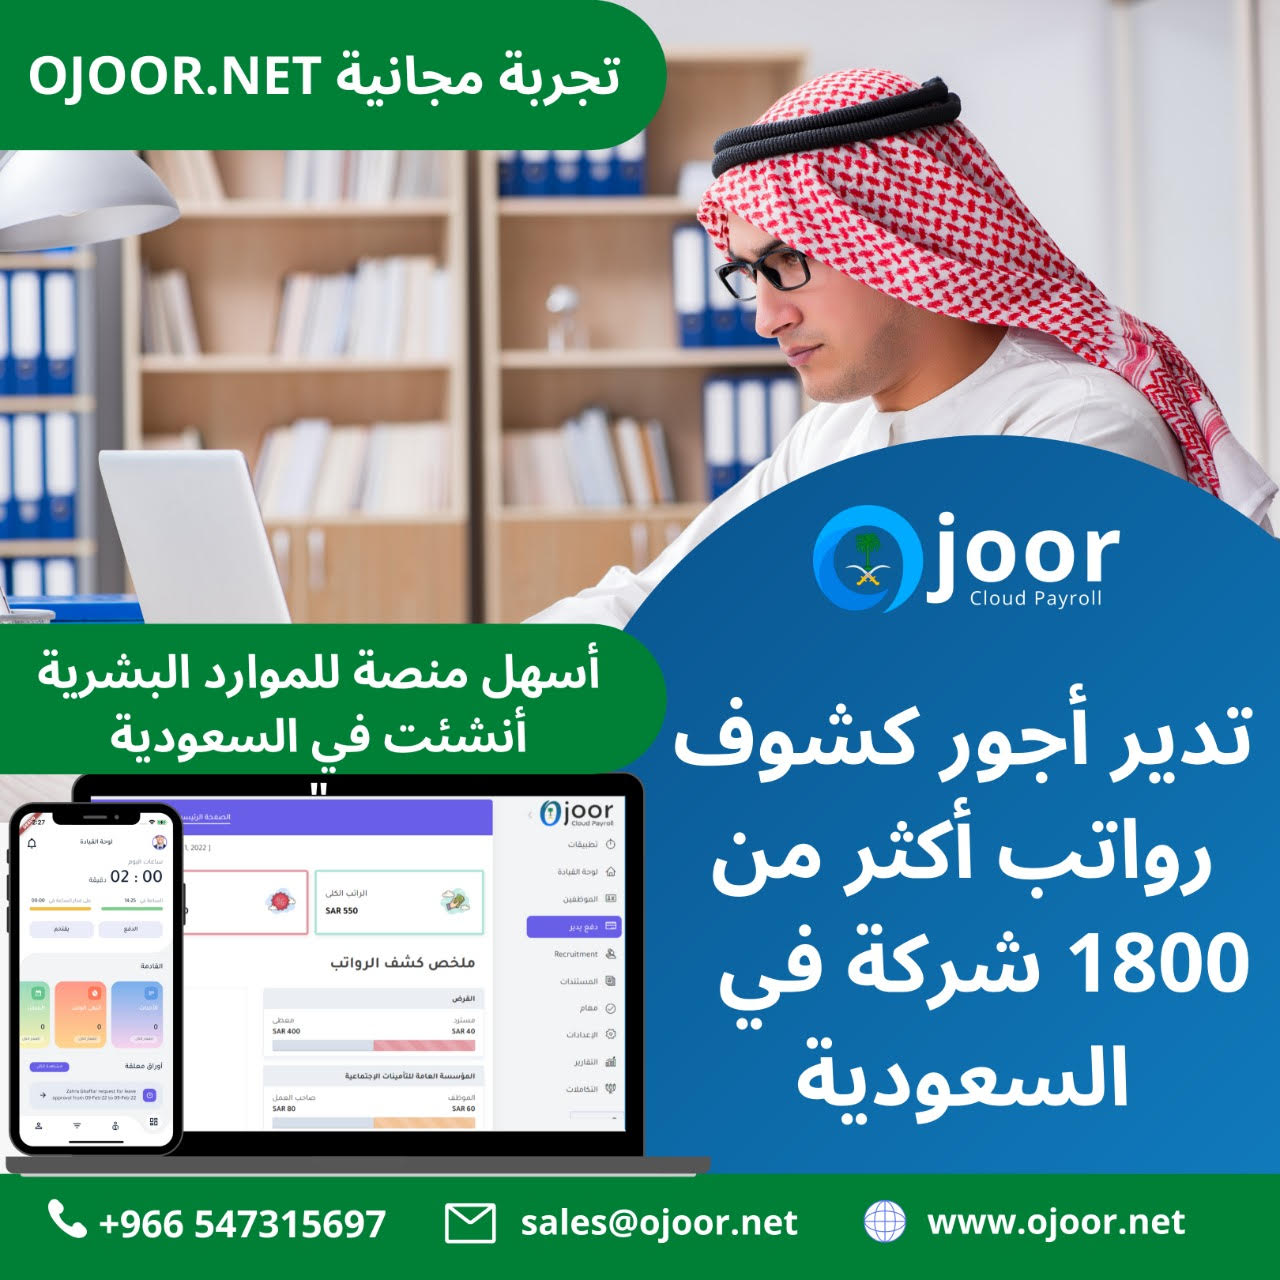 What is the Department Checklist for in Payroll System in Saudi?